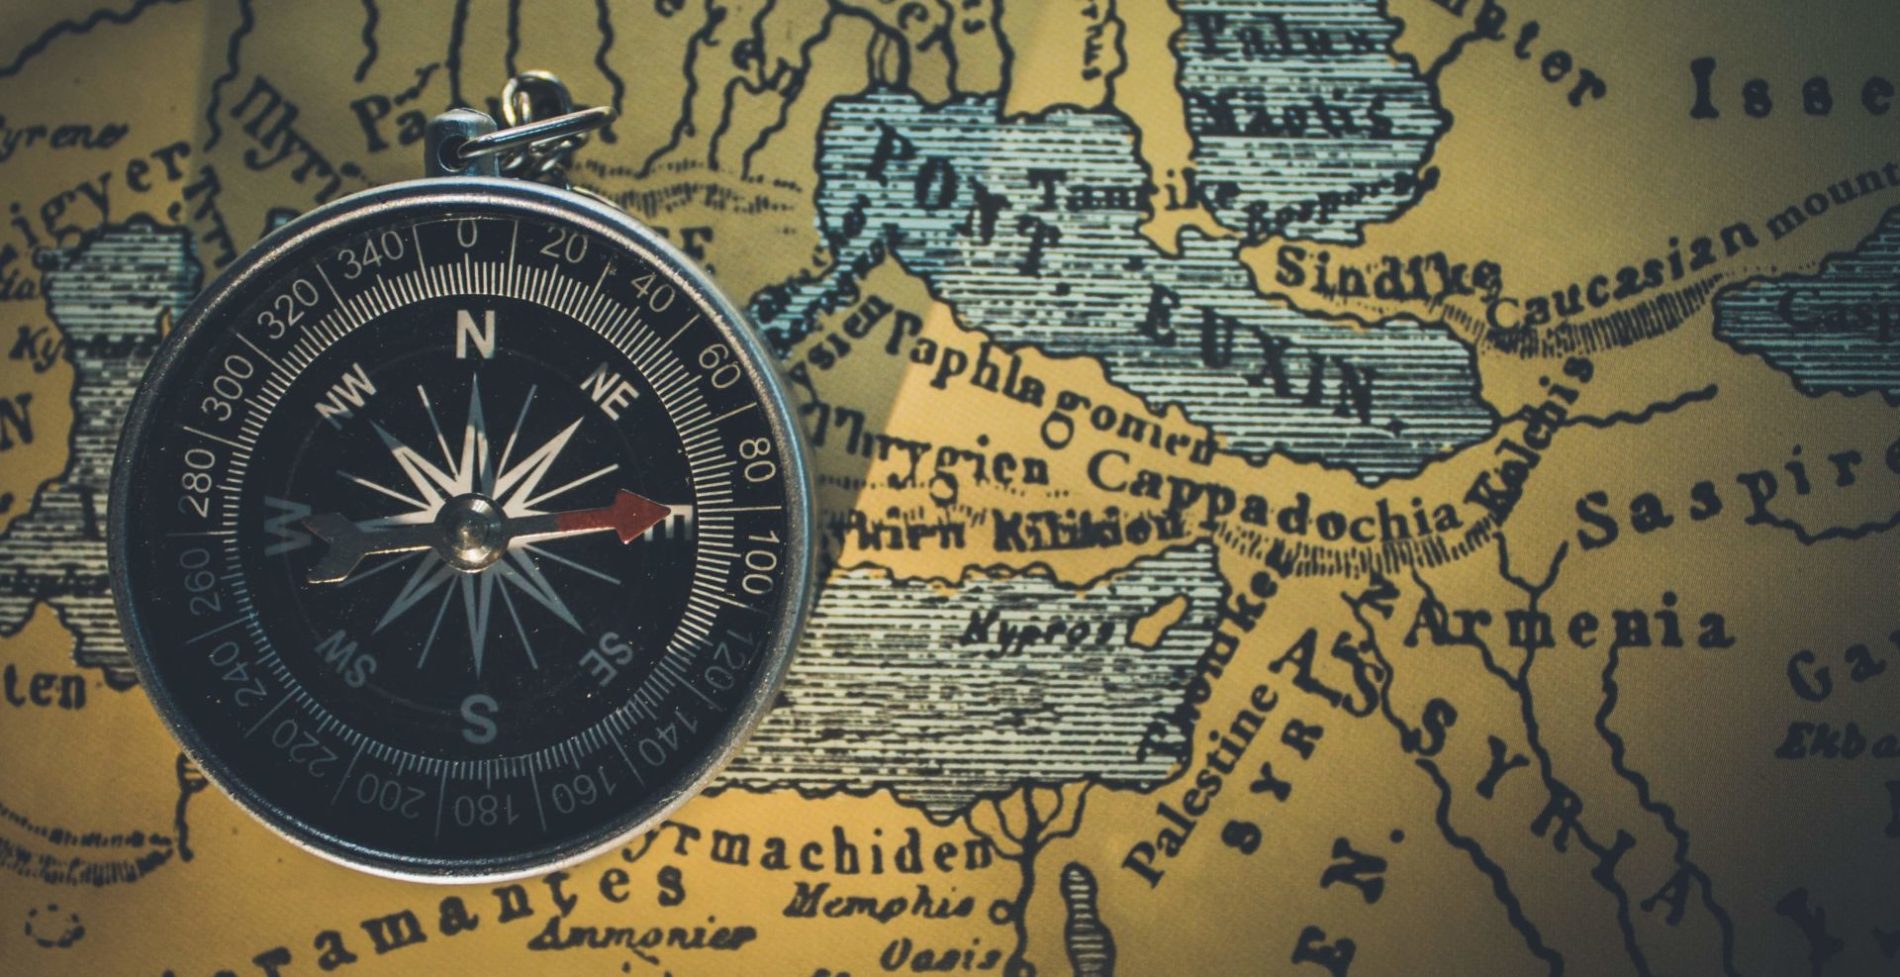 Compass and map showing borders and boundaries.